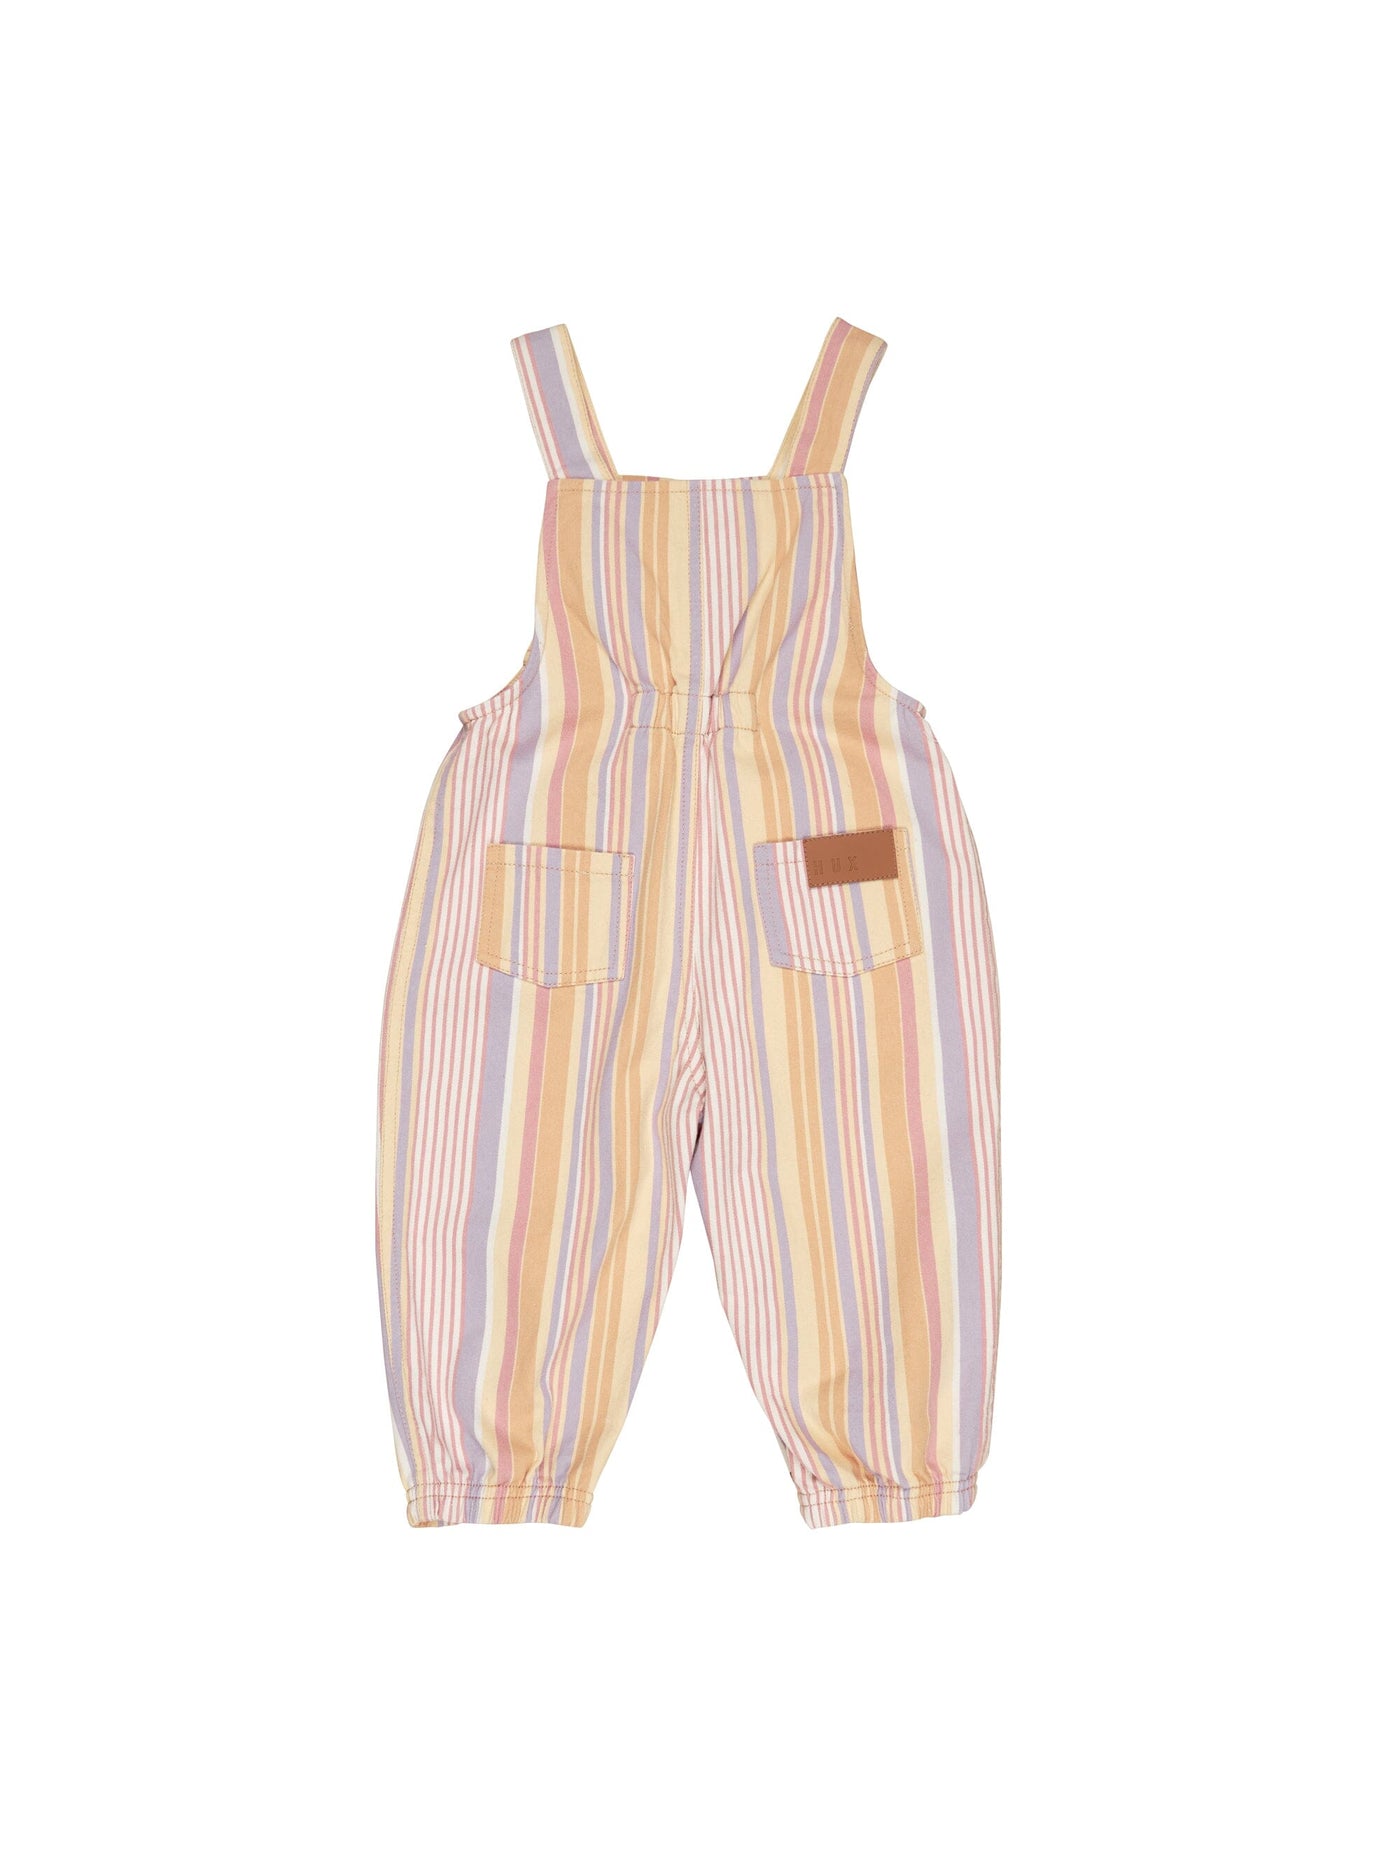 Huxbaby Vintage Stripe Overalls HB015S23 Overalls Huxbaby 